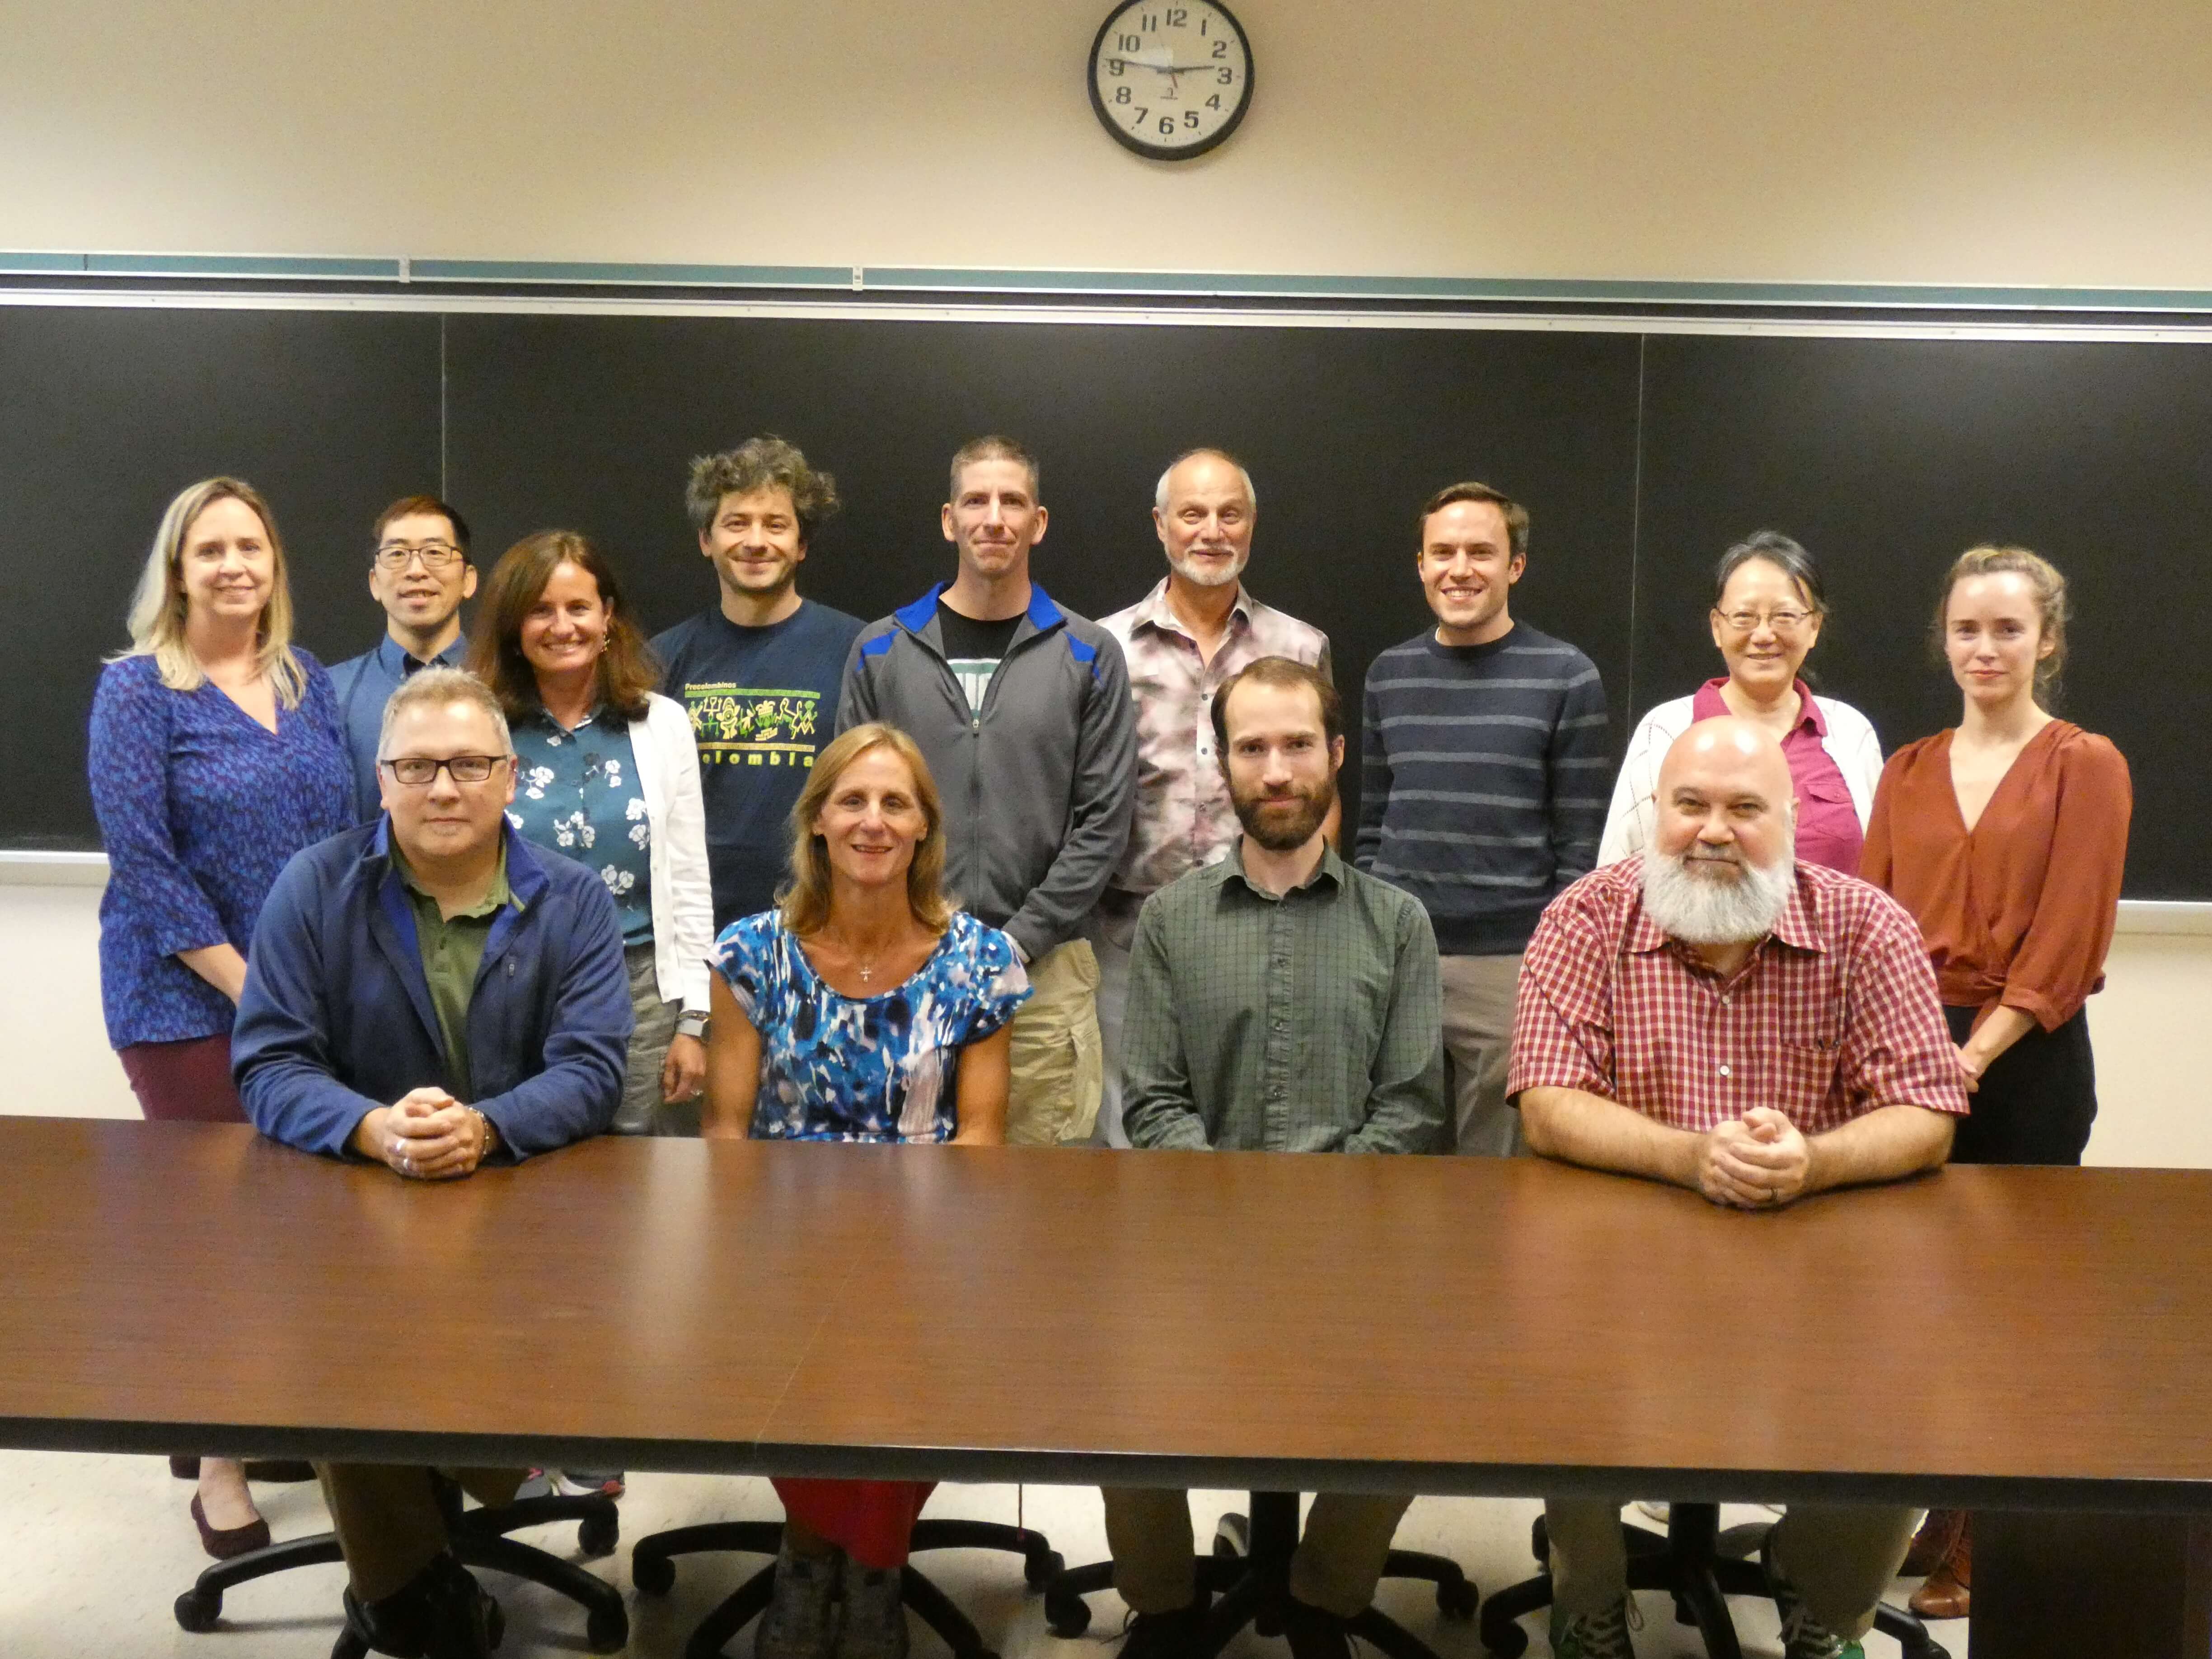 Group photo of Math Department Faculty and Staff for the 2019-2020 academic year